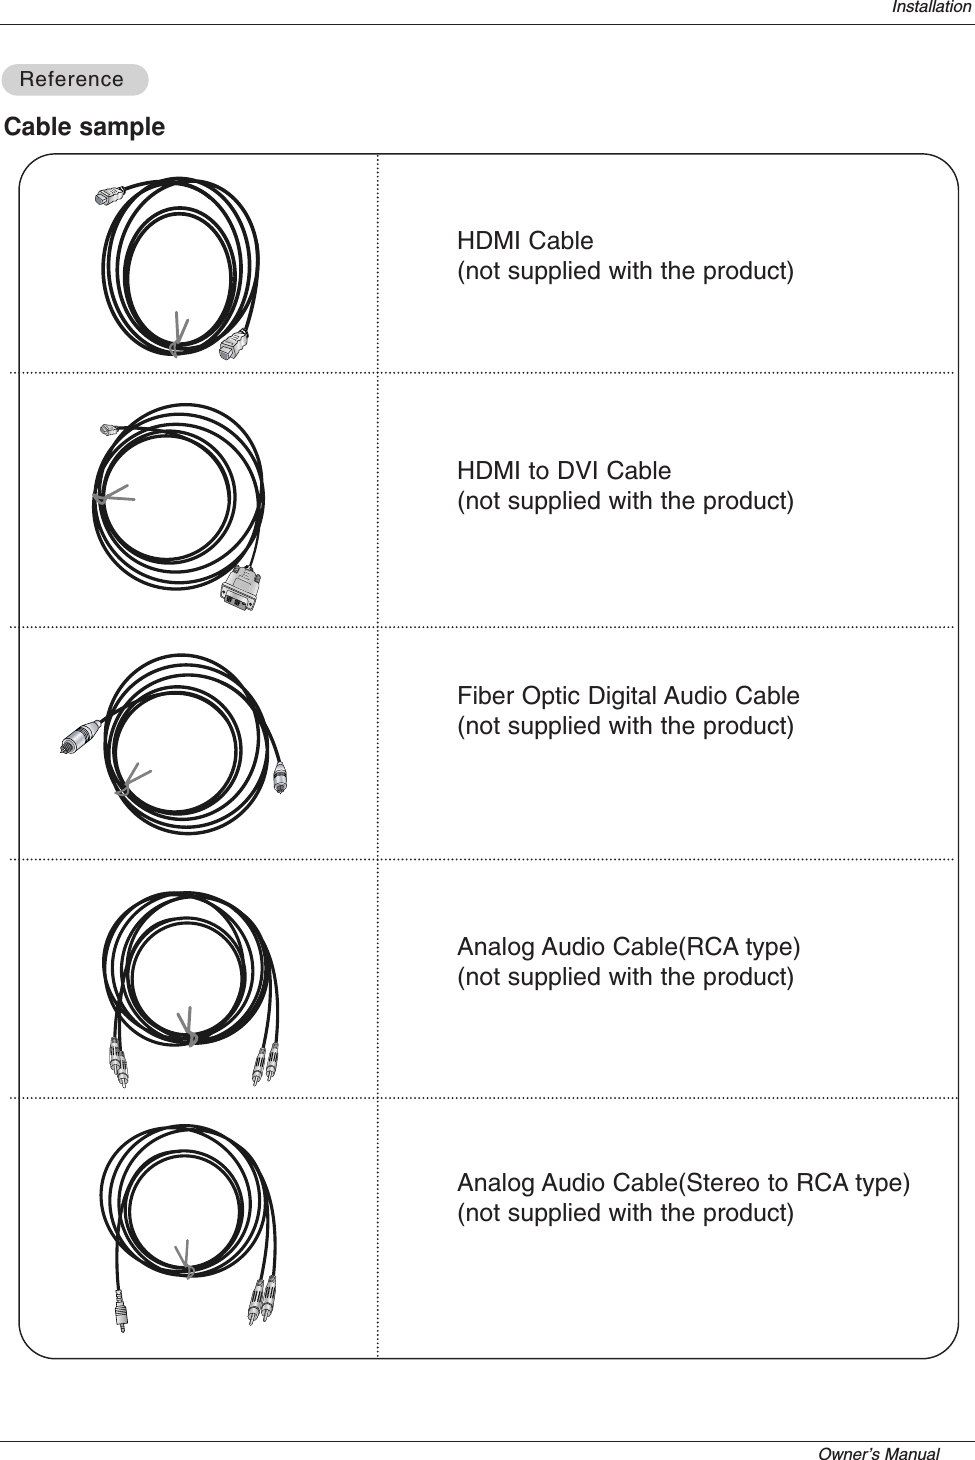 Owner’s Manual   InstallationCable sampleHDMI Cable (not supplied with the product)HDMI to DVI Cable (not supplied with the product)Fiber Optic Digital Audio Cable(not supplied with the product)Analog Audio Cable(RCA type)(not supplied with the product)Analog Audio Cable(Stereo to RCA type)(not supplied with the product)ReferenceReference